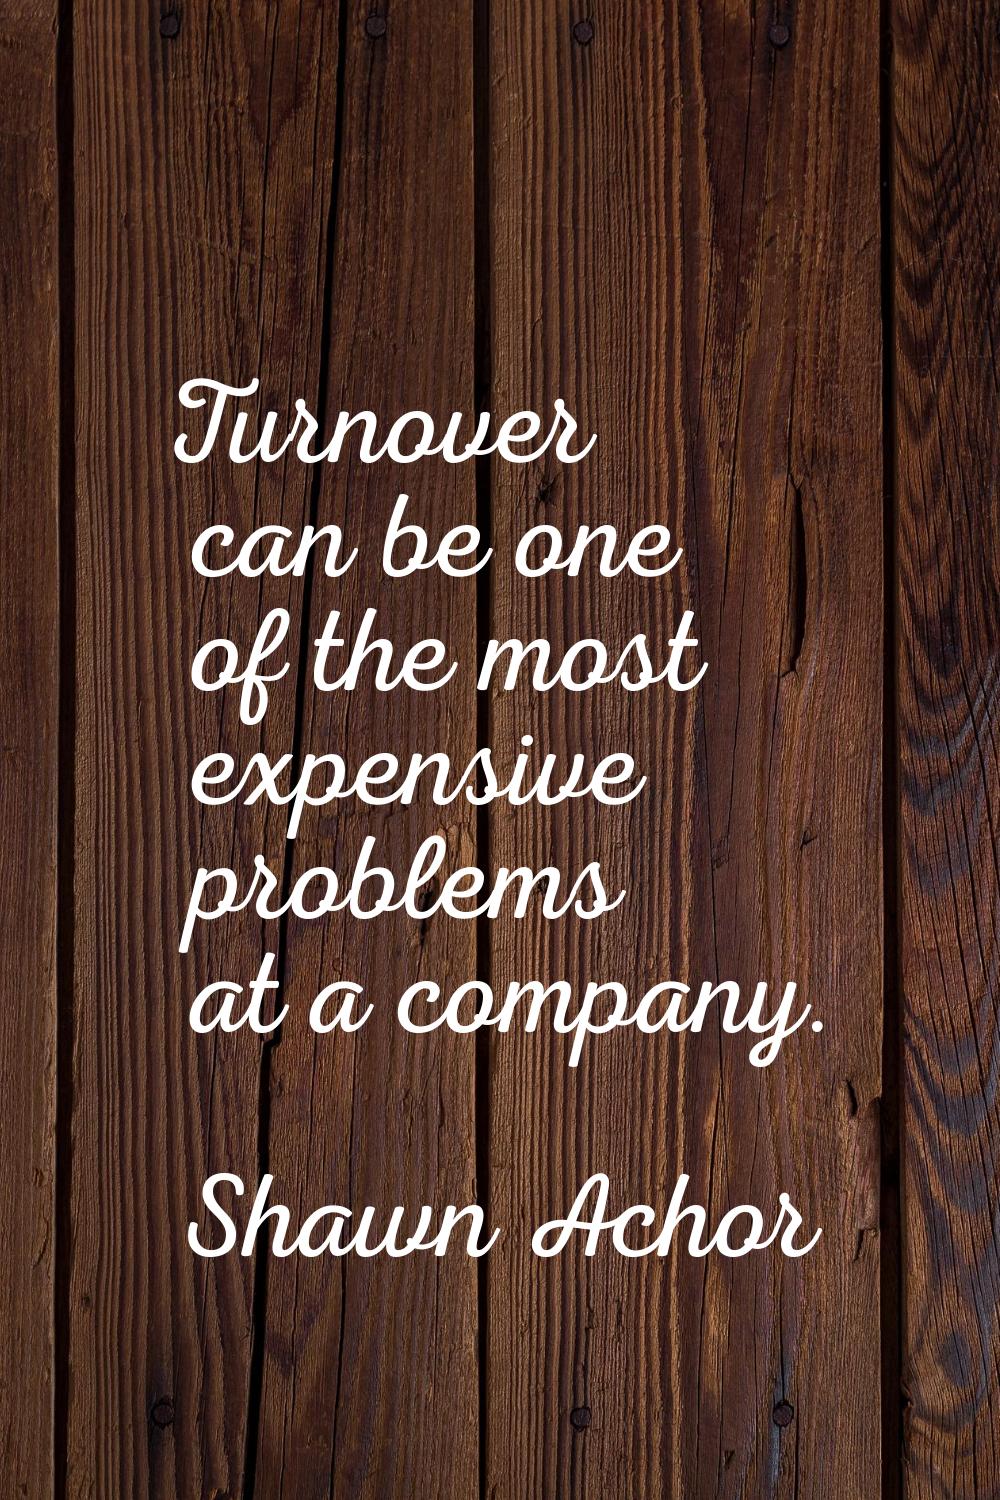 Turnover can be one of the most expensive problems at a company.